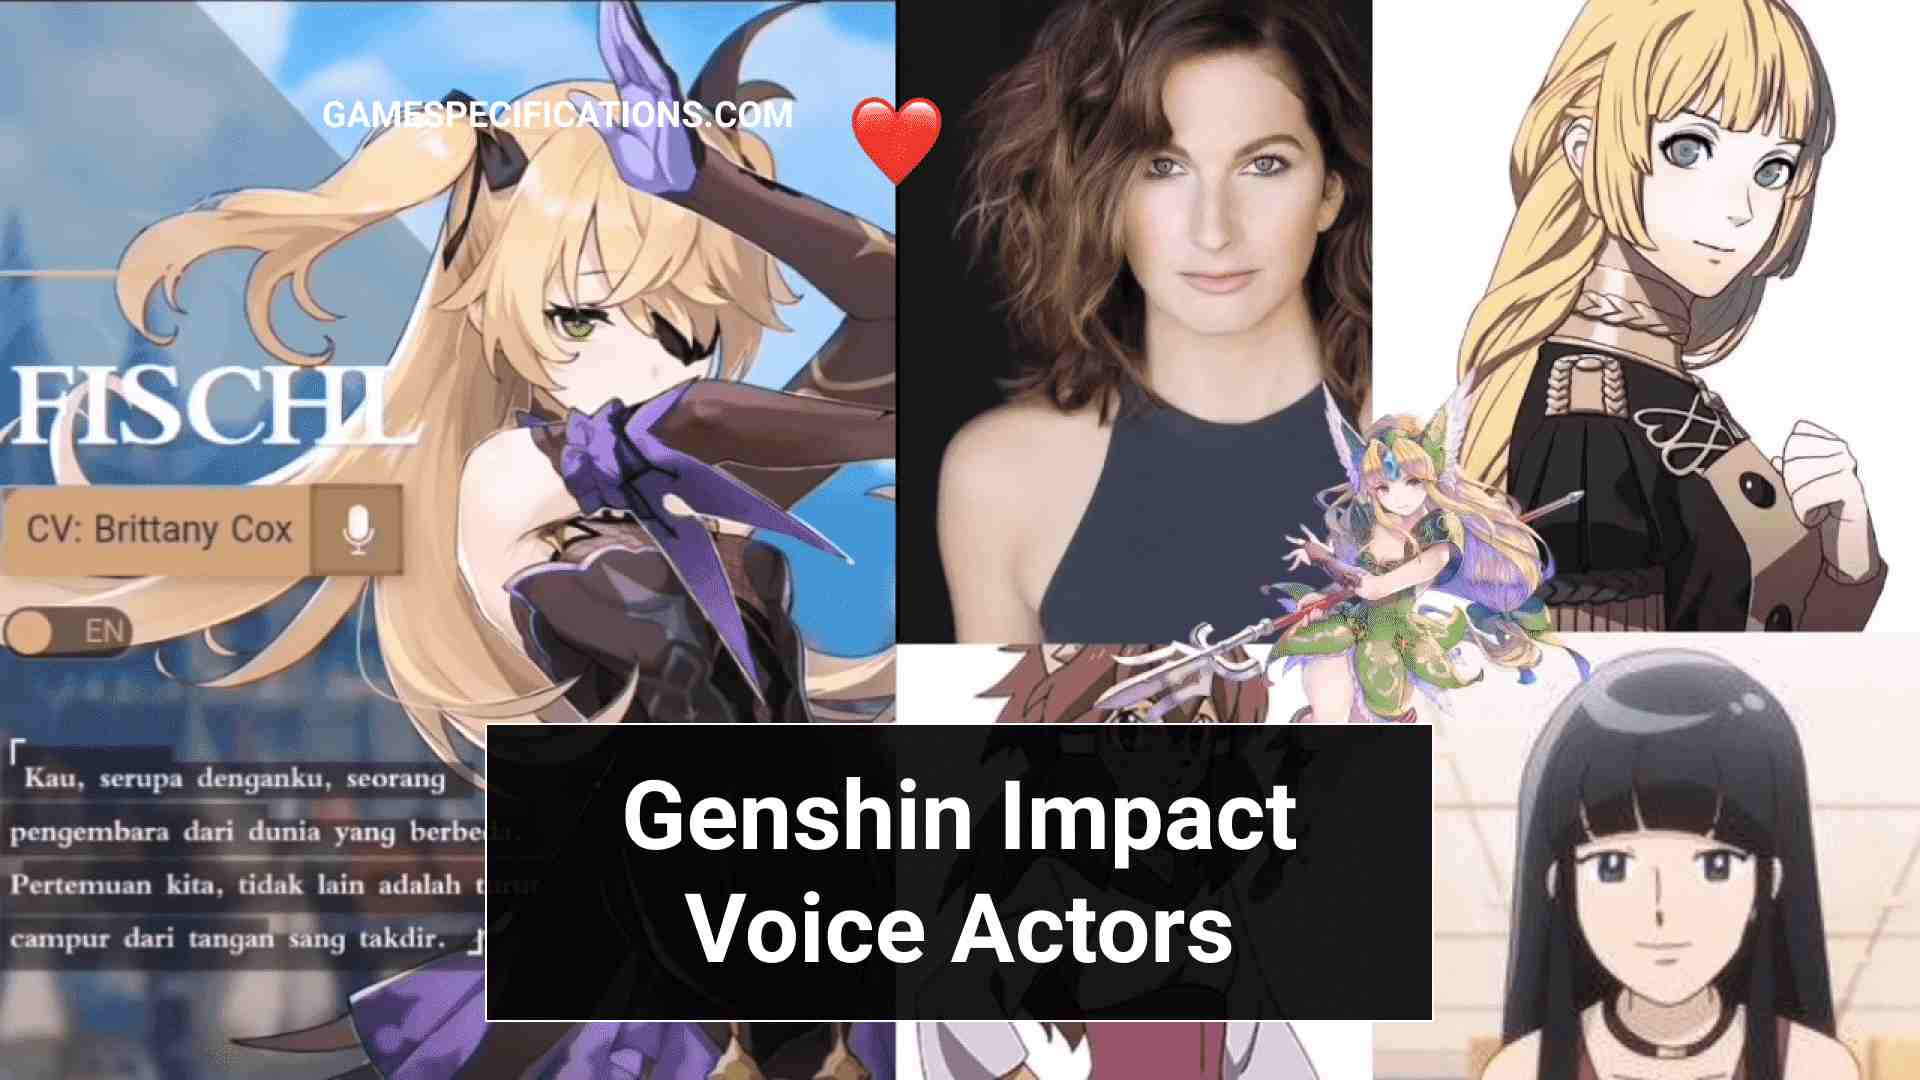 Genshin Impact Voice Actors – Who’s The Voice Behind Cute Characters?